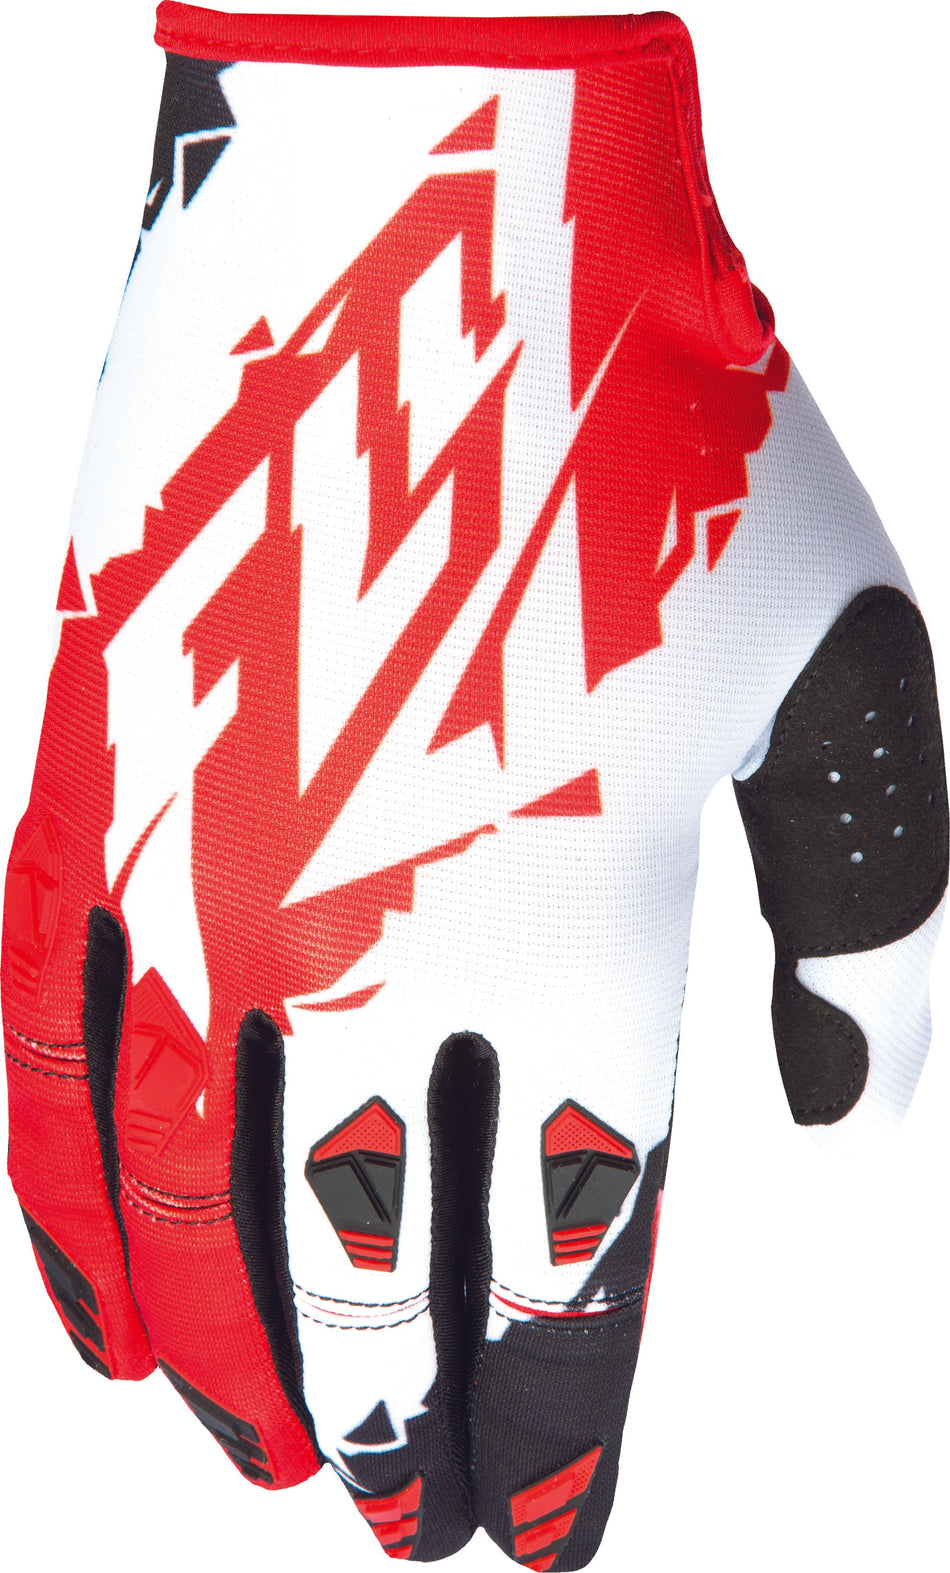 FLY RACING Kinetic Glove Red/White Sz 9 M 370-41409